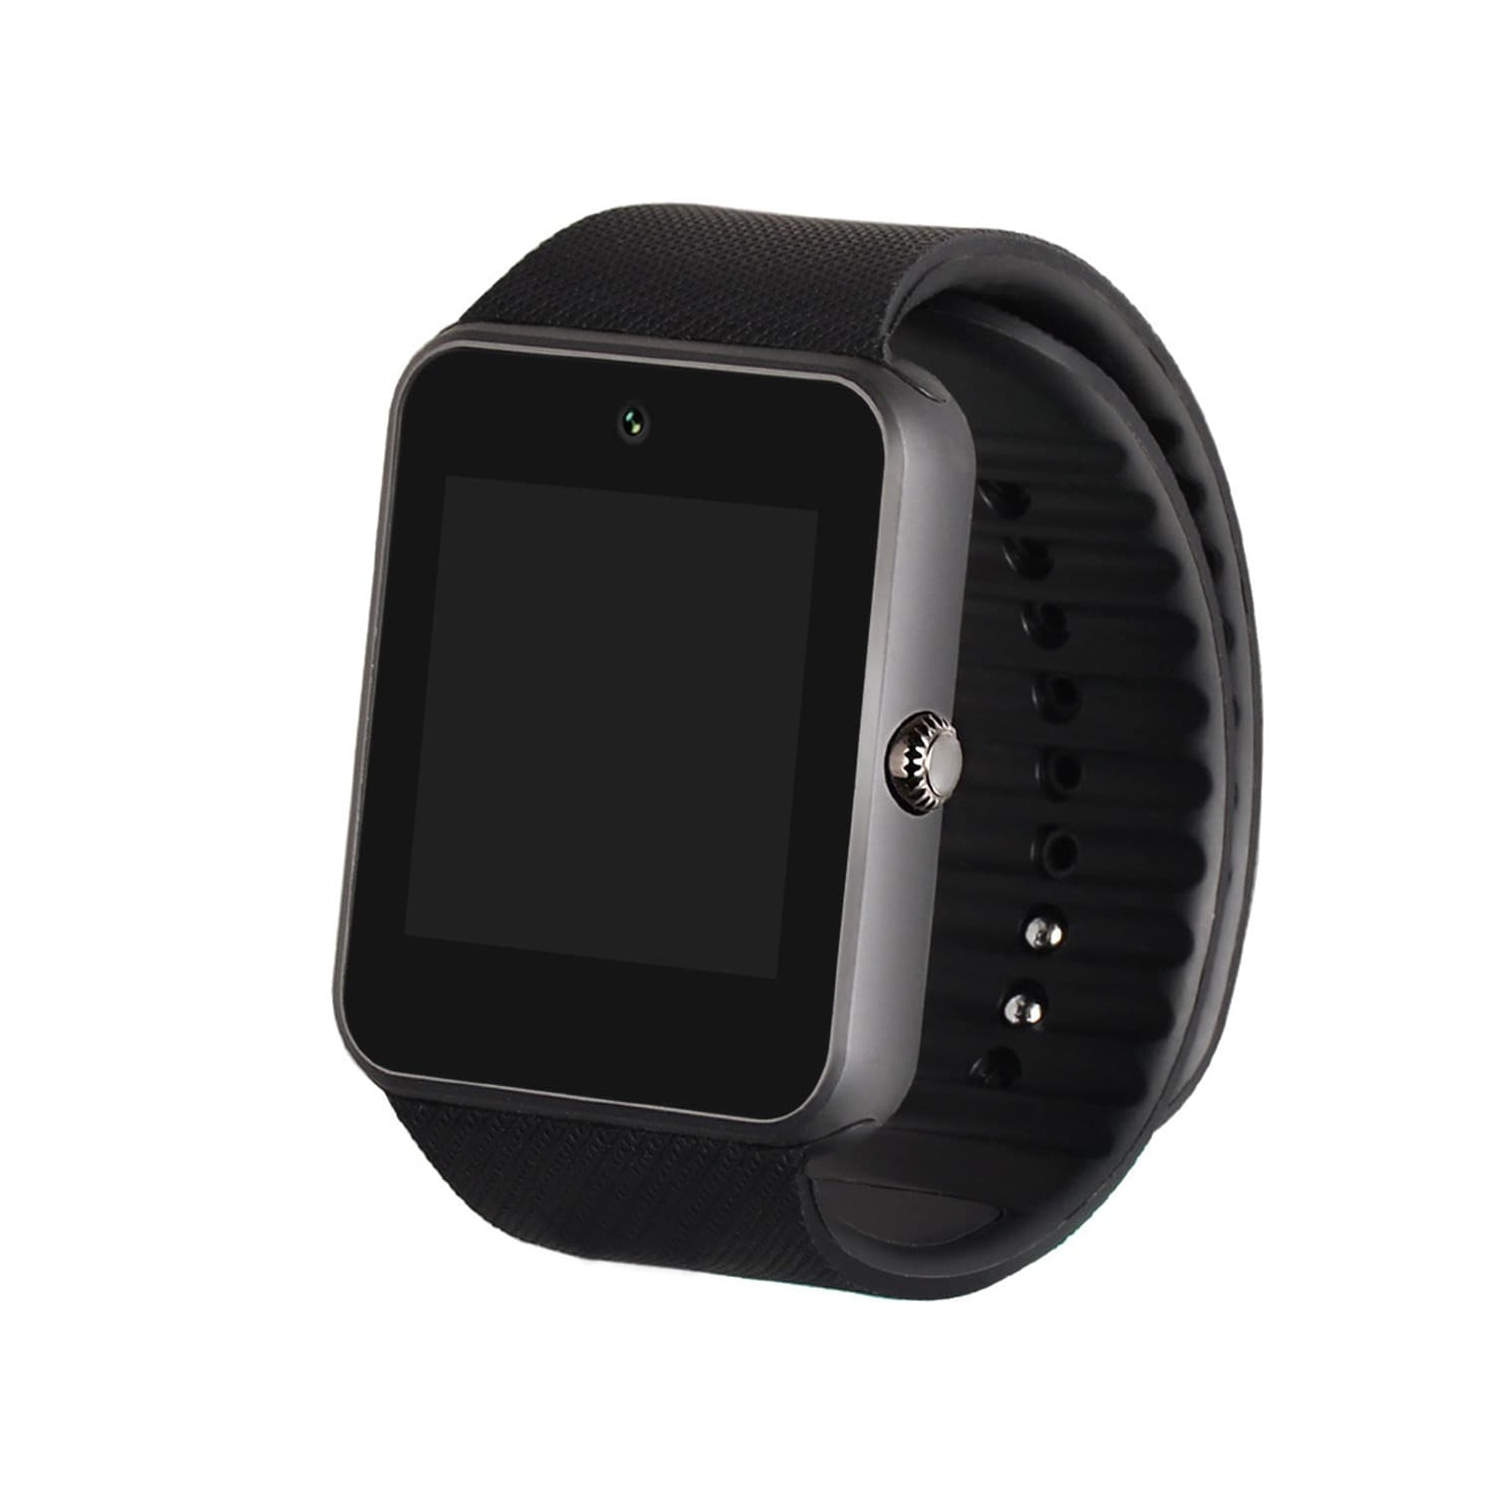 ULTREND GORATE Smart Watch with Camera & SIM Slot Bluetooth Phone Mate Pedometer for Android and iOS